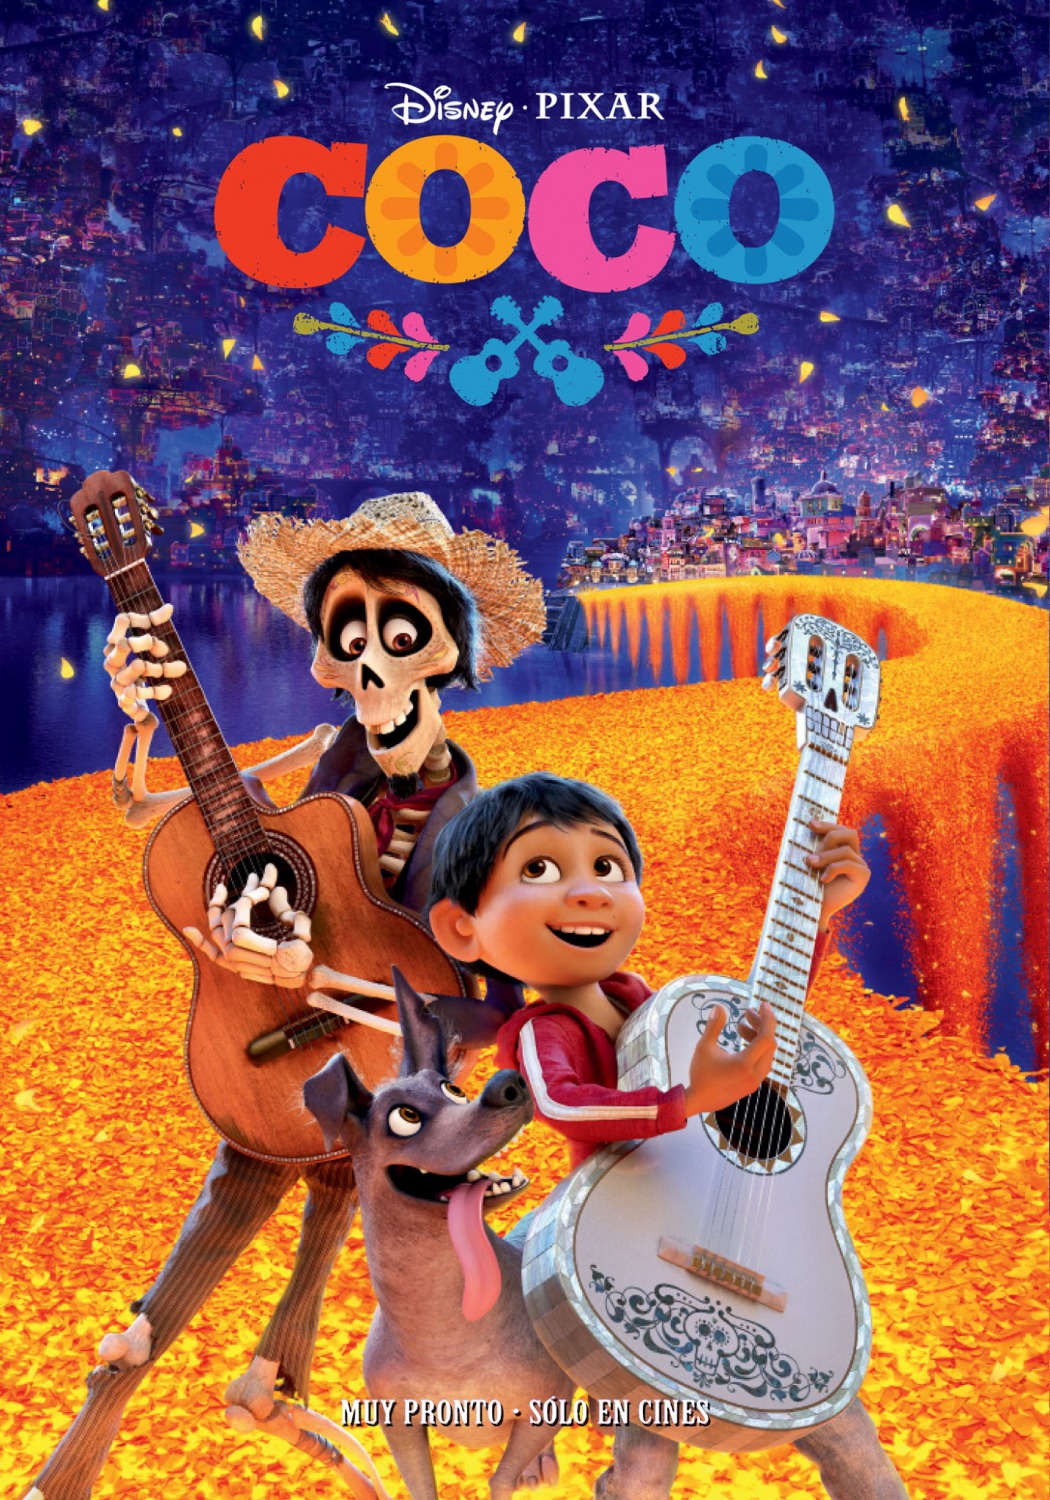 Extra Large Movie Poster Image for Coco (#9 of 17)